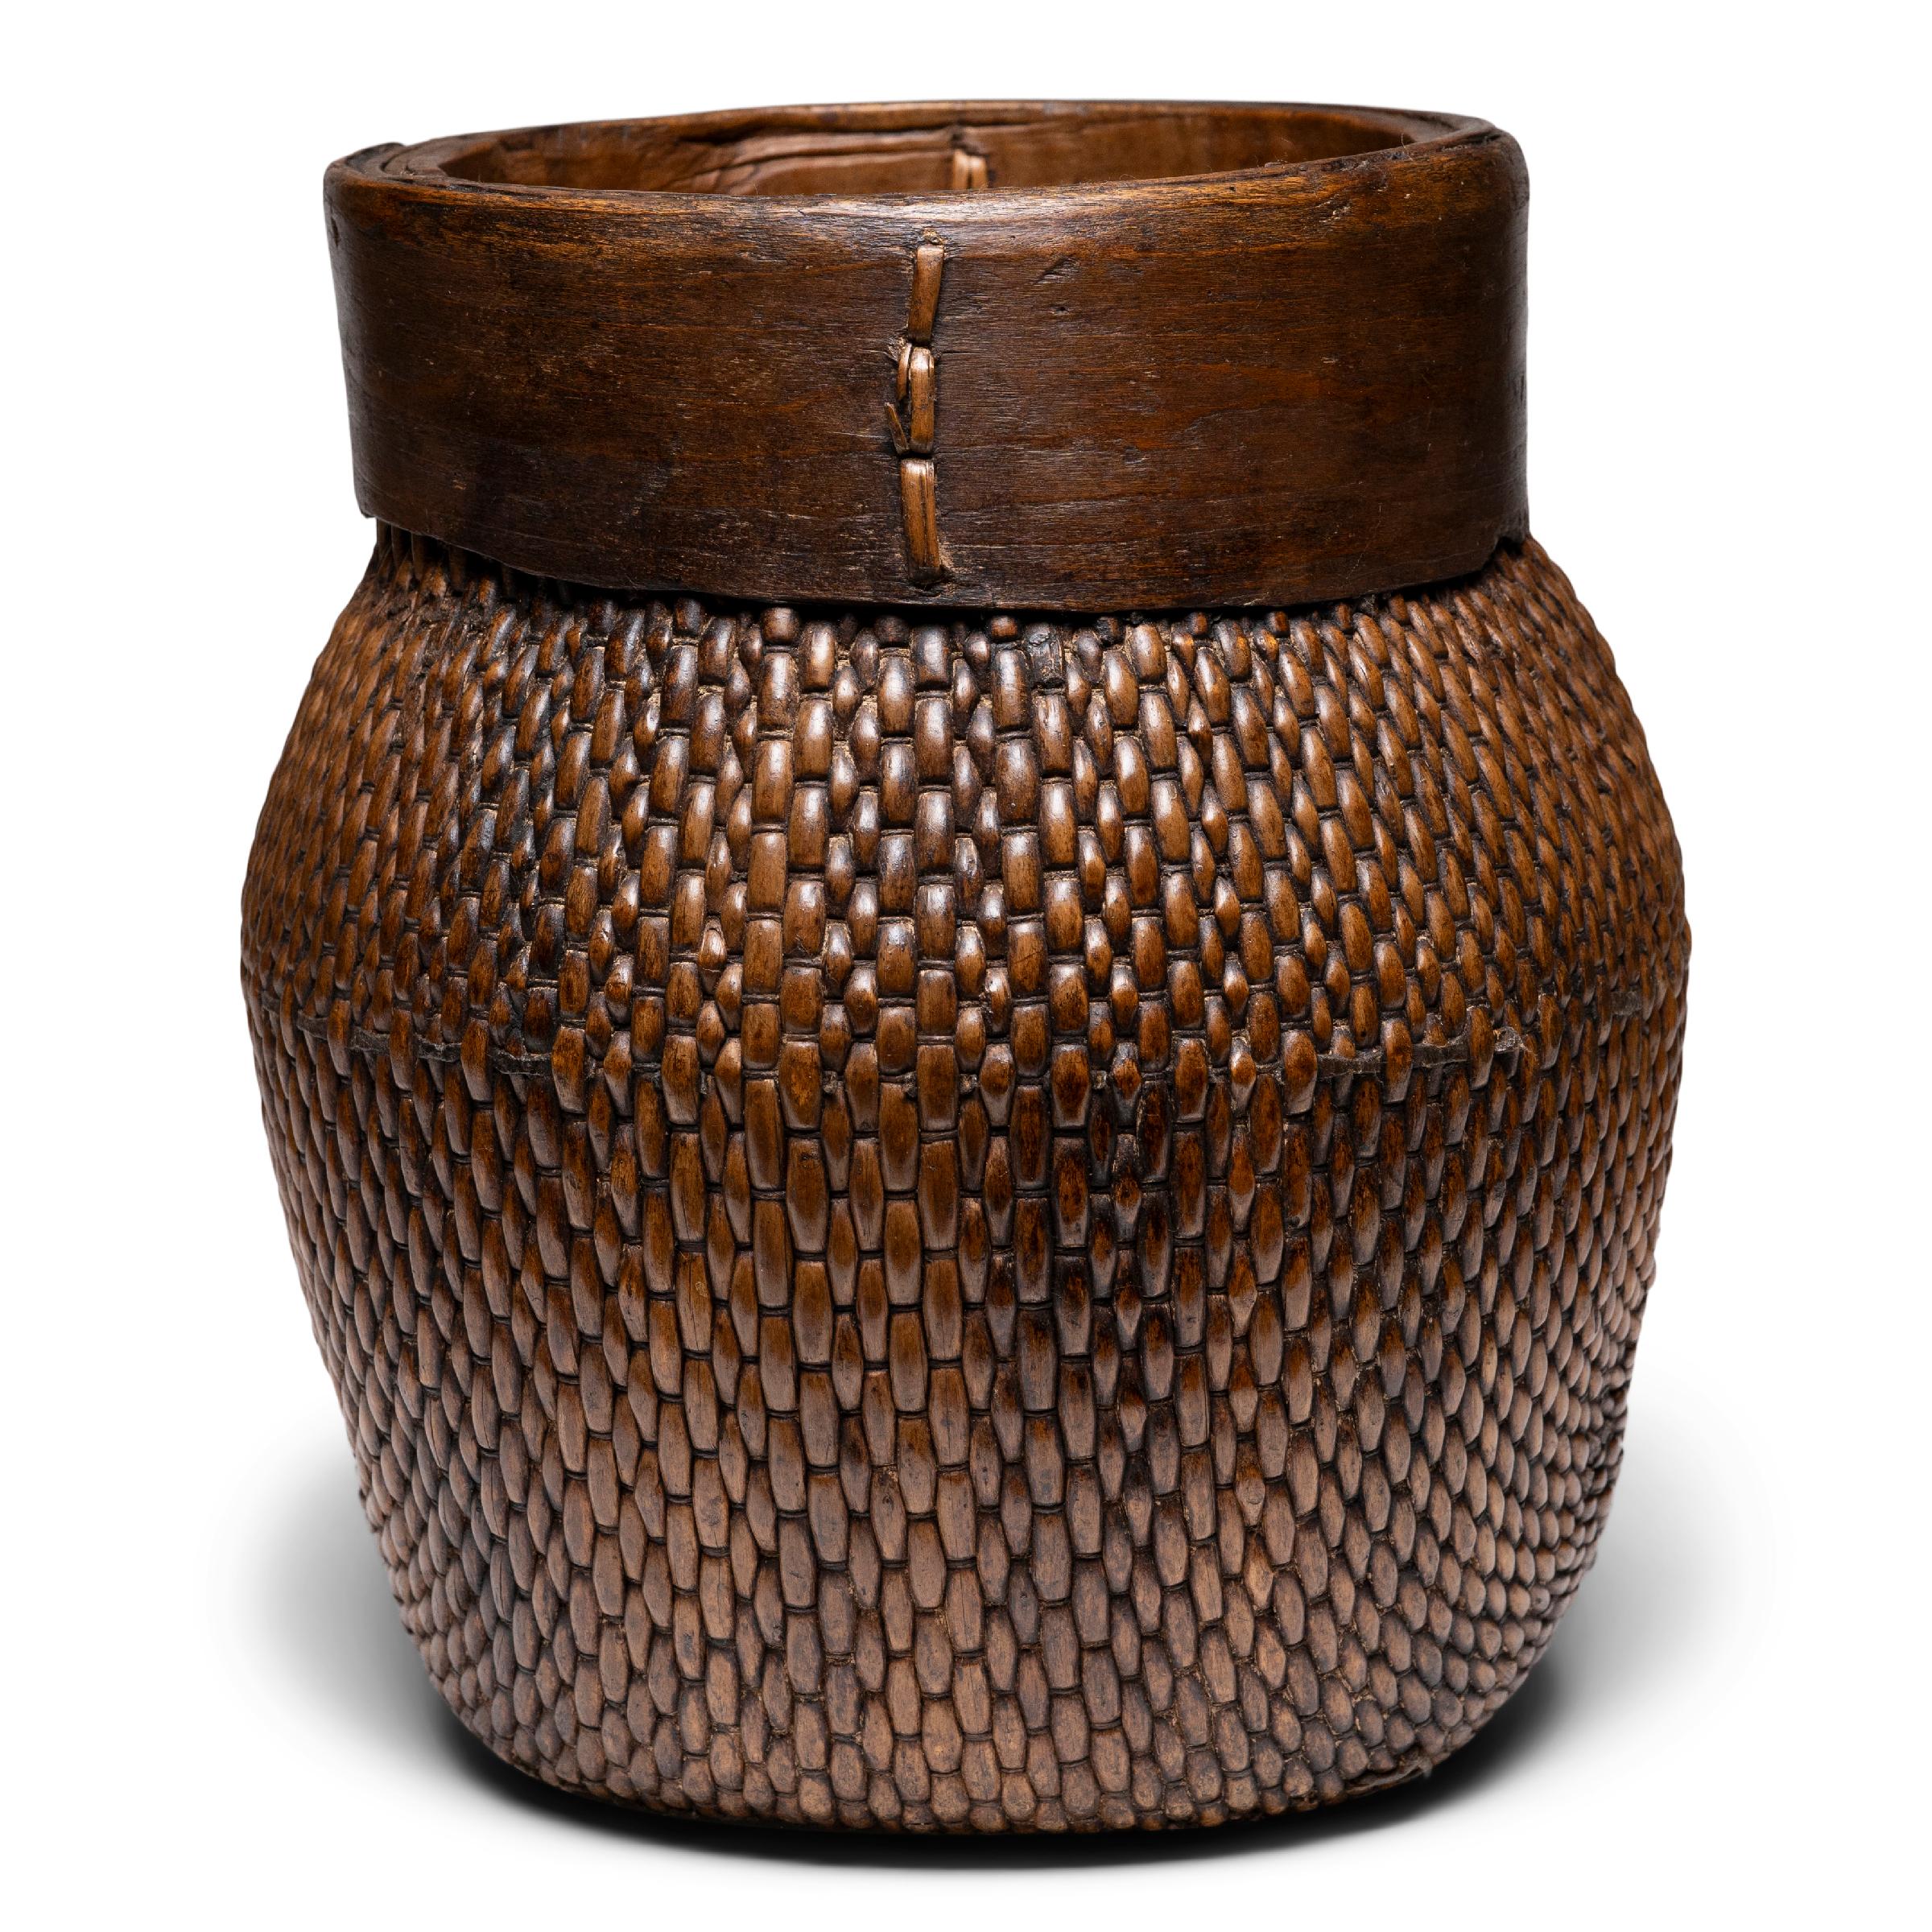 Centuries ago, a woven reed fisherman’s basket such as this would have been common in rural China as an everyday item, used until it became worn through. This hand-woven example remains in beautiful condition and features a tapered woven body